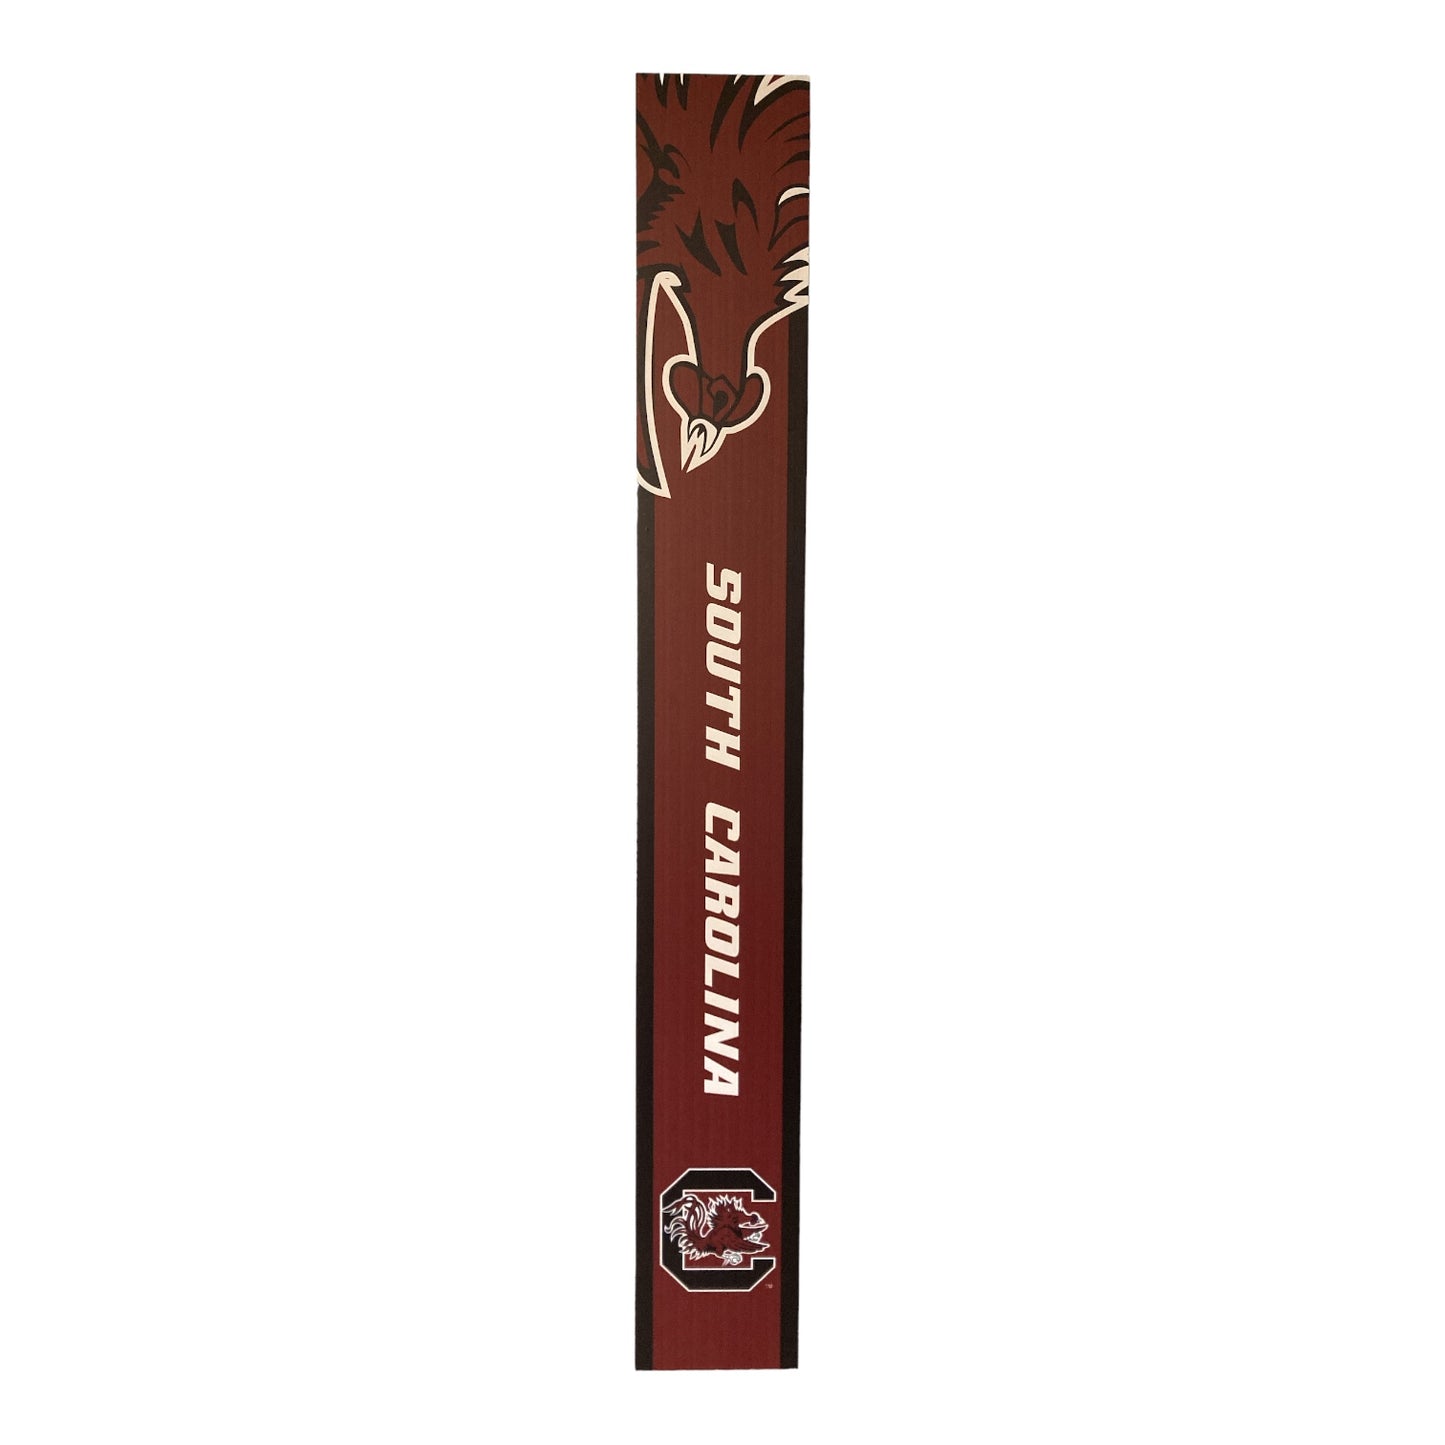 Official NCAA Licensed Weather Resistant Porch Greeter Sign, South Carolina Gamecocks